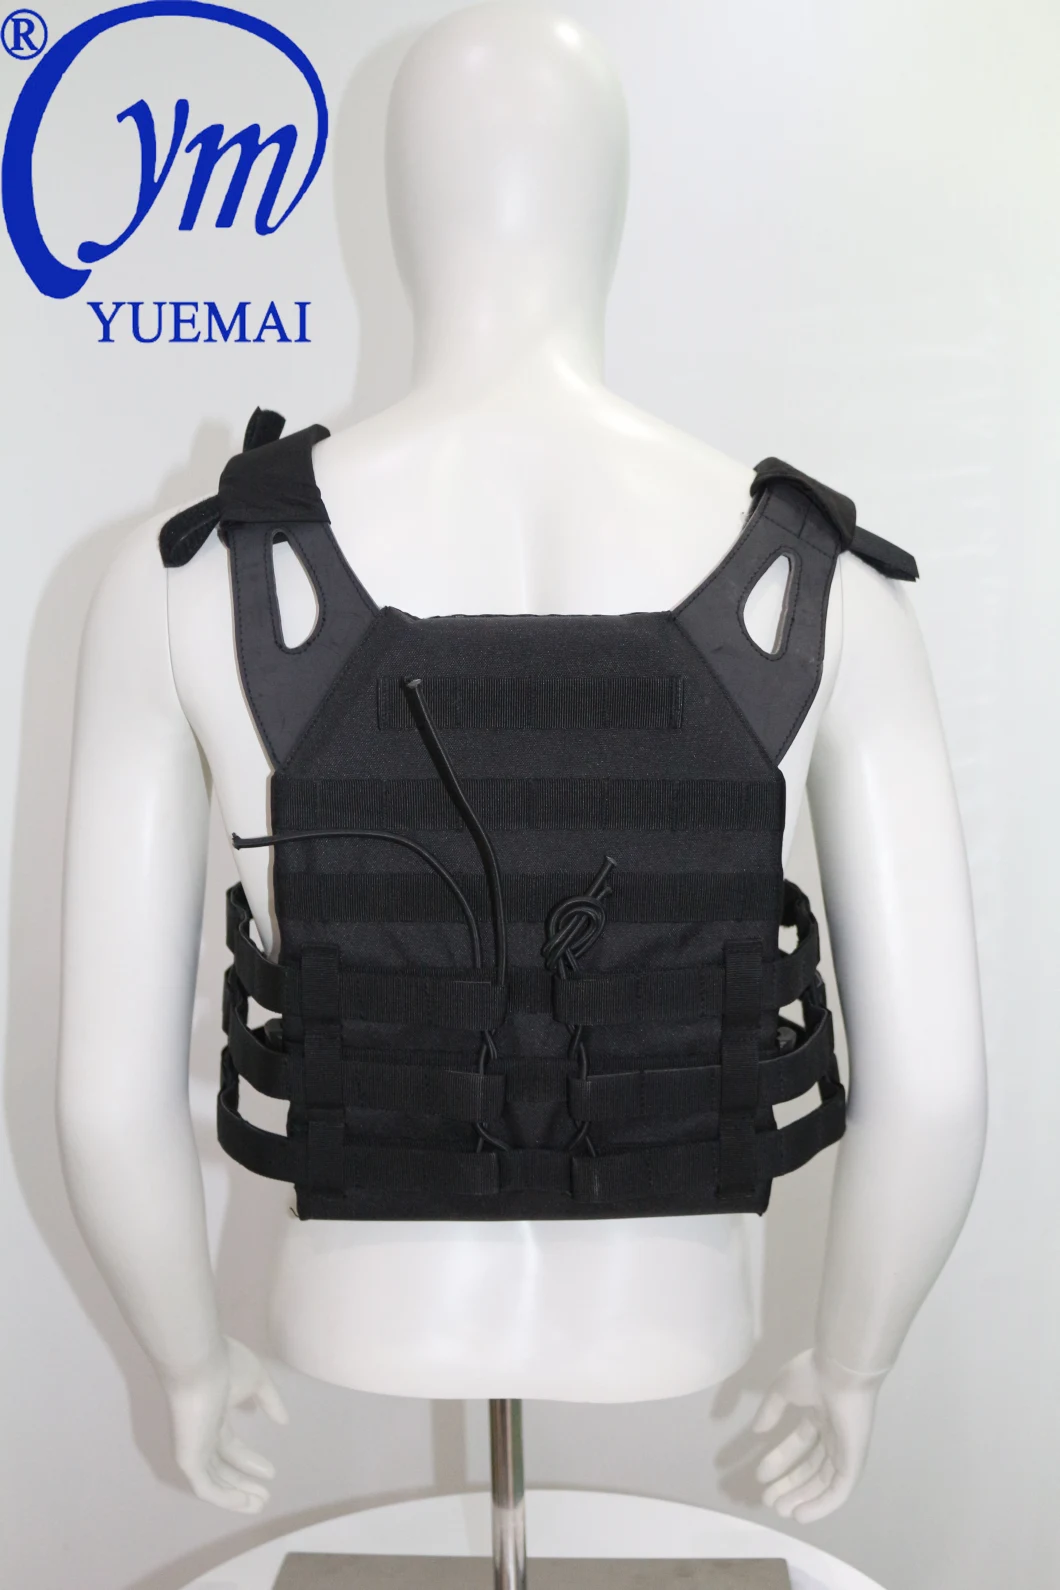 Airsoft Safety Bulletproof Combat Police Army Tactical Vest